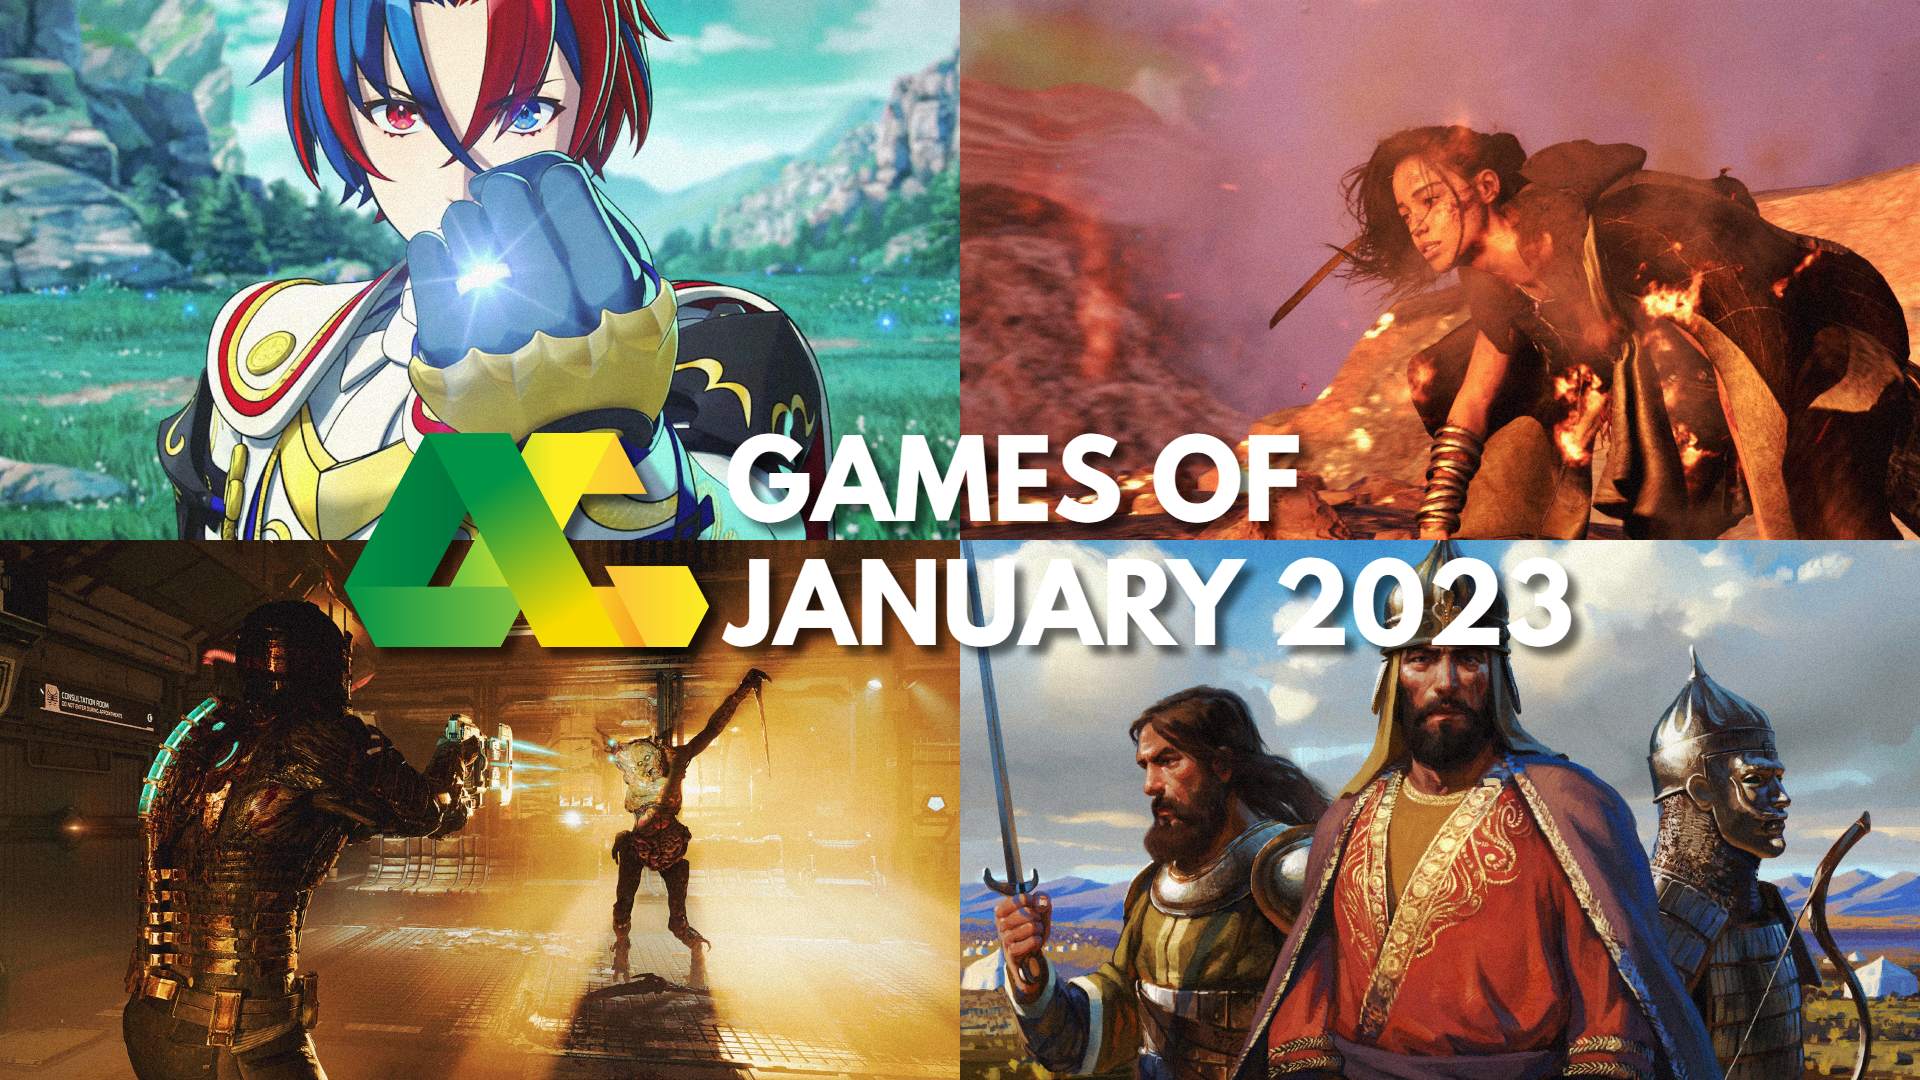 List of Free PC Games (Updated January 8th 2023)